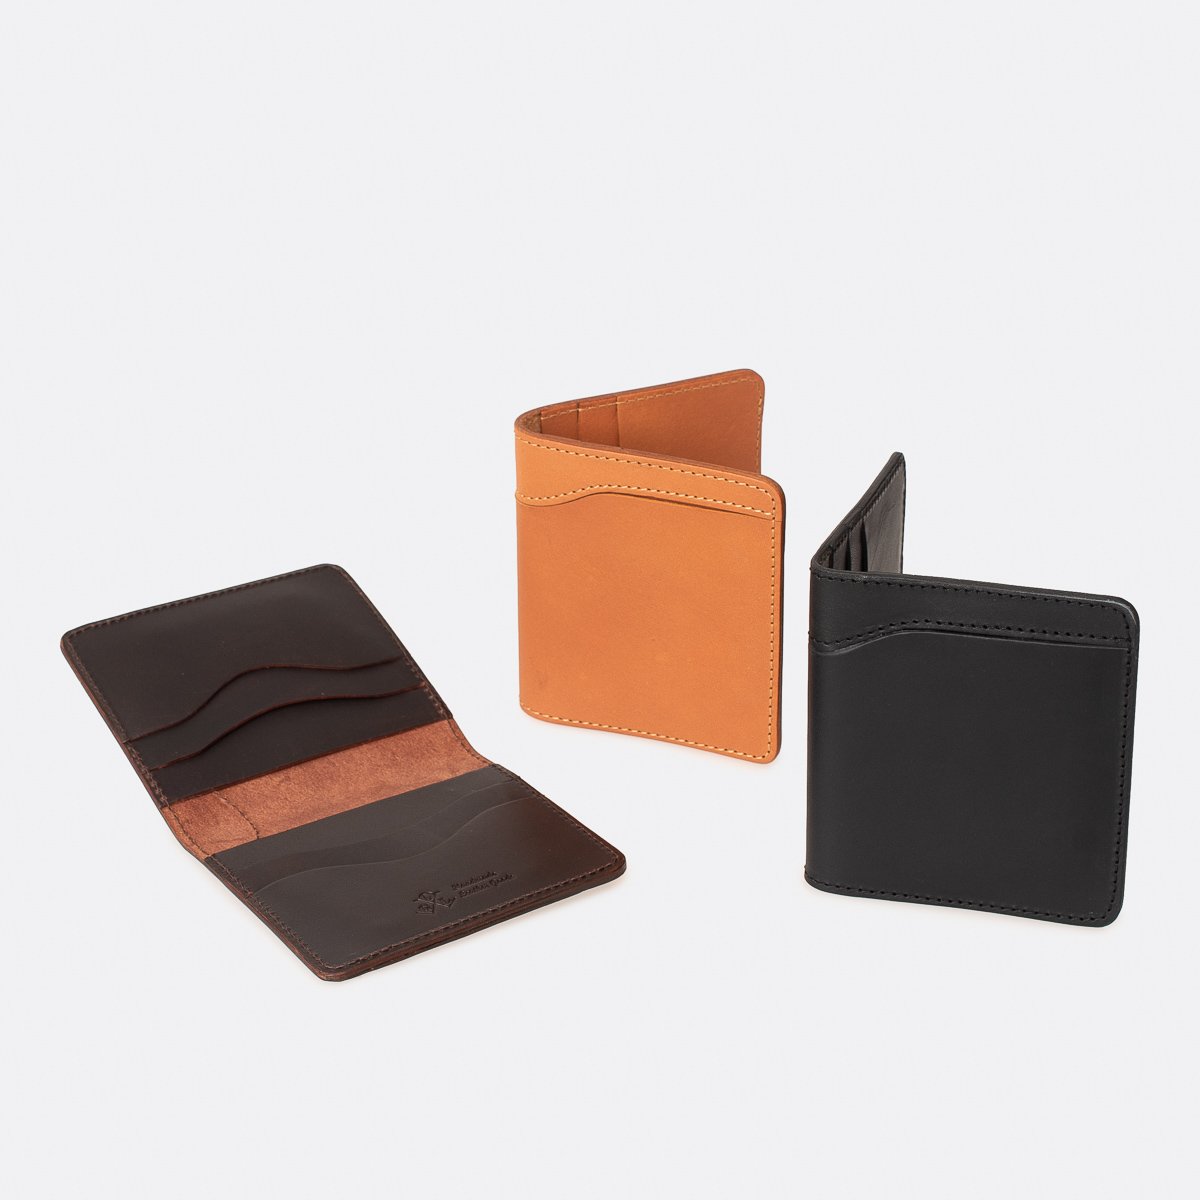 Obbi Good Label Condor Bifold Wallet with Outer Bill Slot - Tan